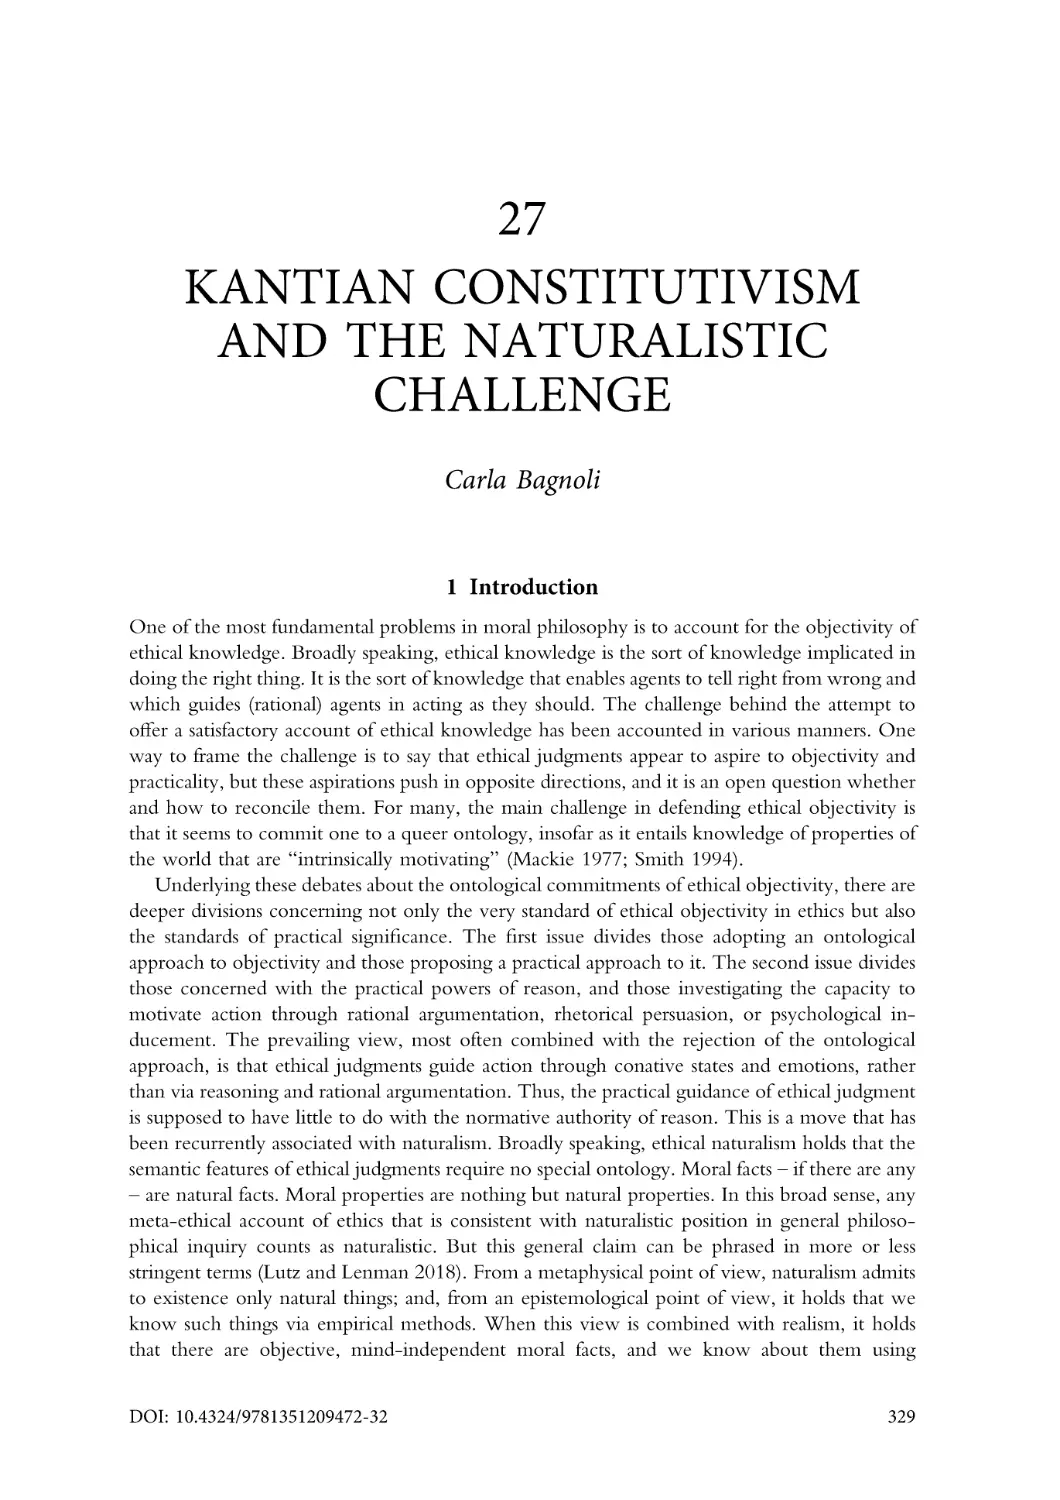 27. Kantian constitutivism and the naturalistic challenge
1. Introduction